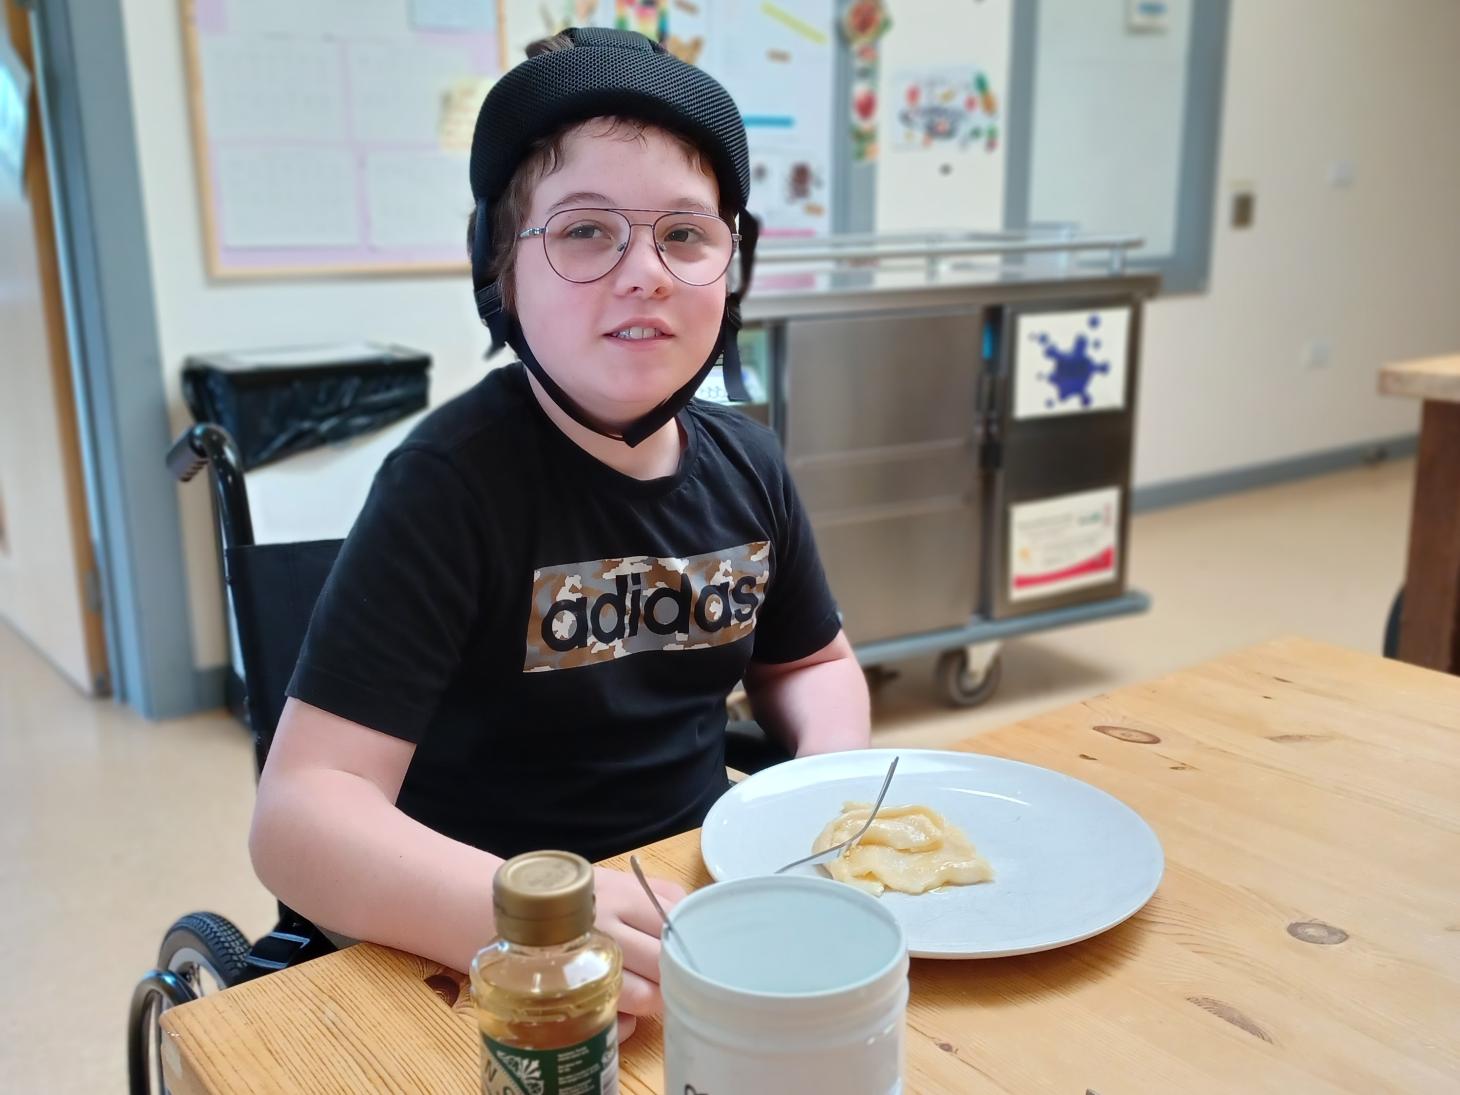 Riley with pancakes he has made in baking group